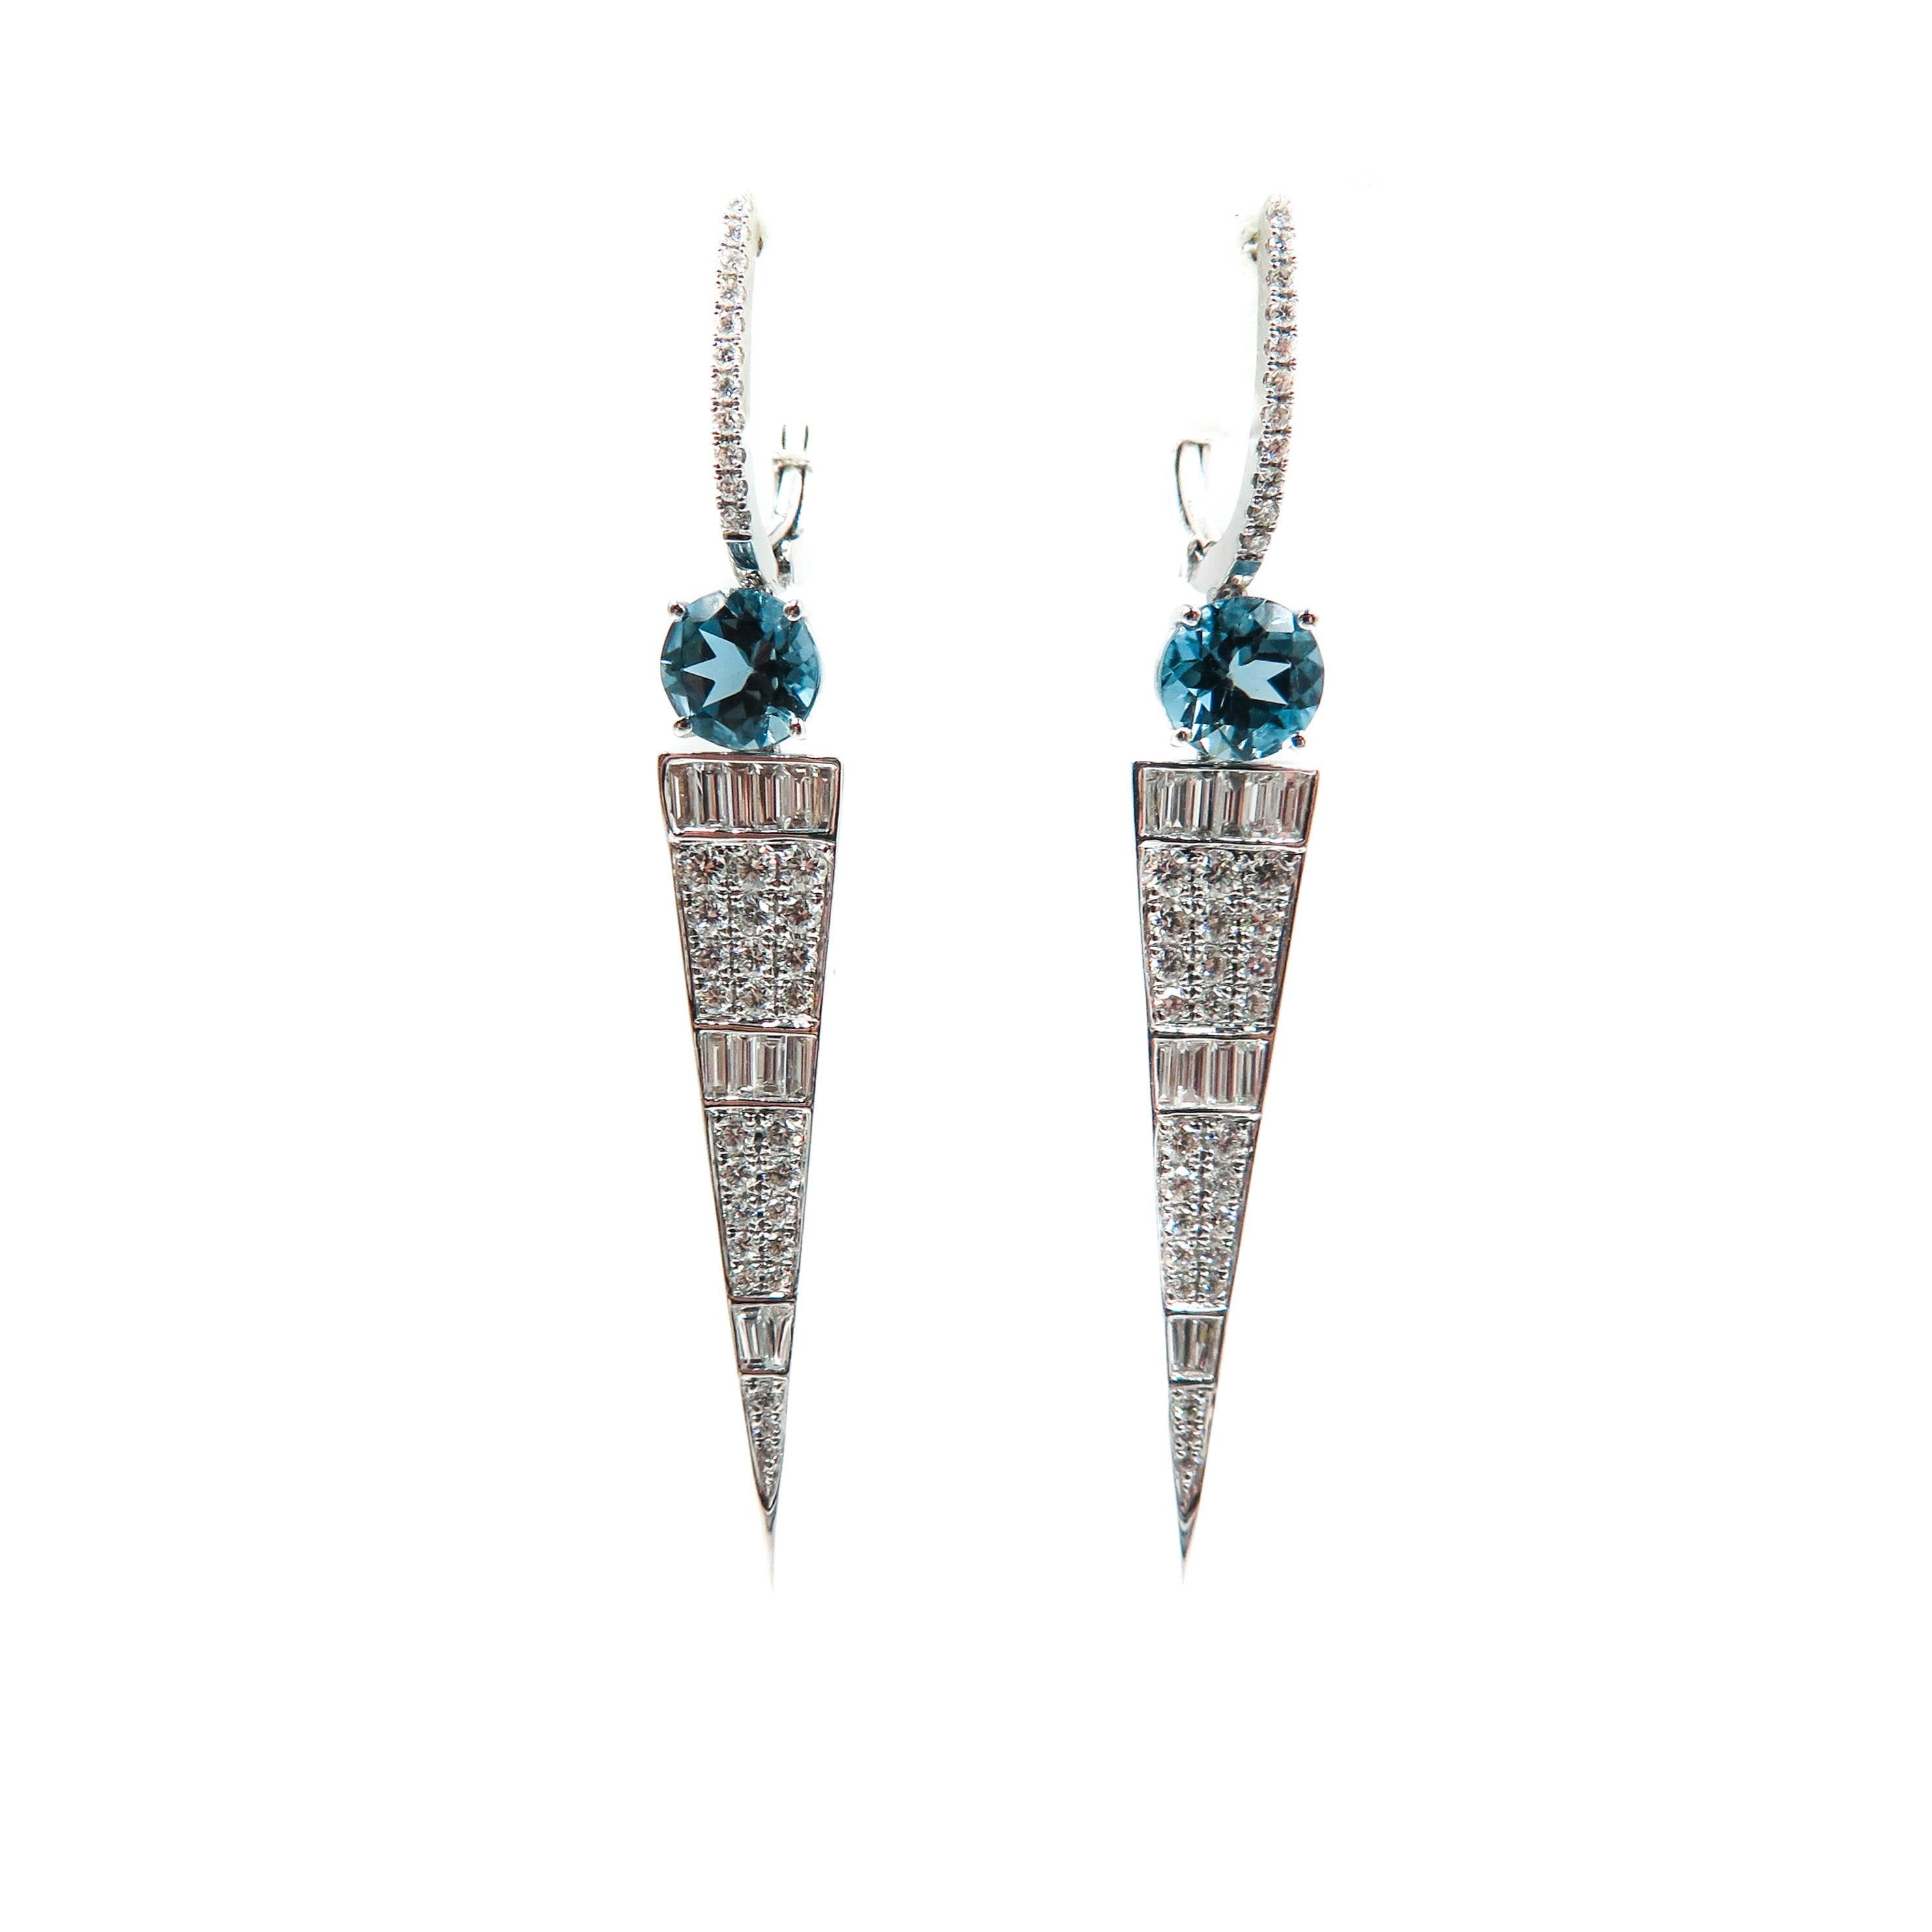 Blue as deep as the ocean and sparkles as the waves touched by the sun, this design is an ode to modern elegance. Indulge in the refined artistry of the latest style of this fine Diamond and Blue Topaz and Drop Earrings.
Delicately set in 18k white